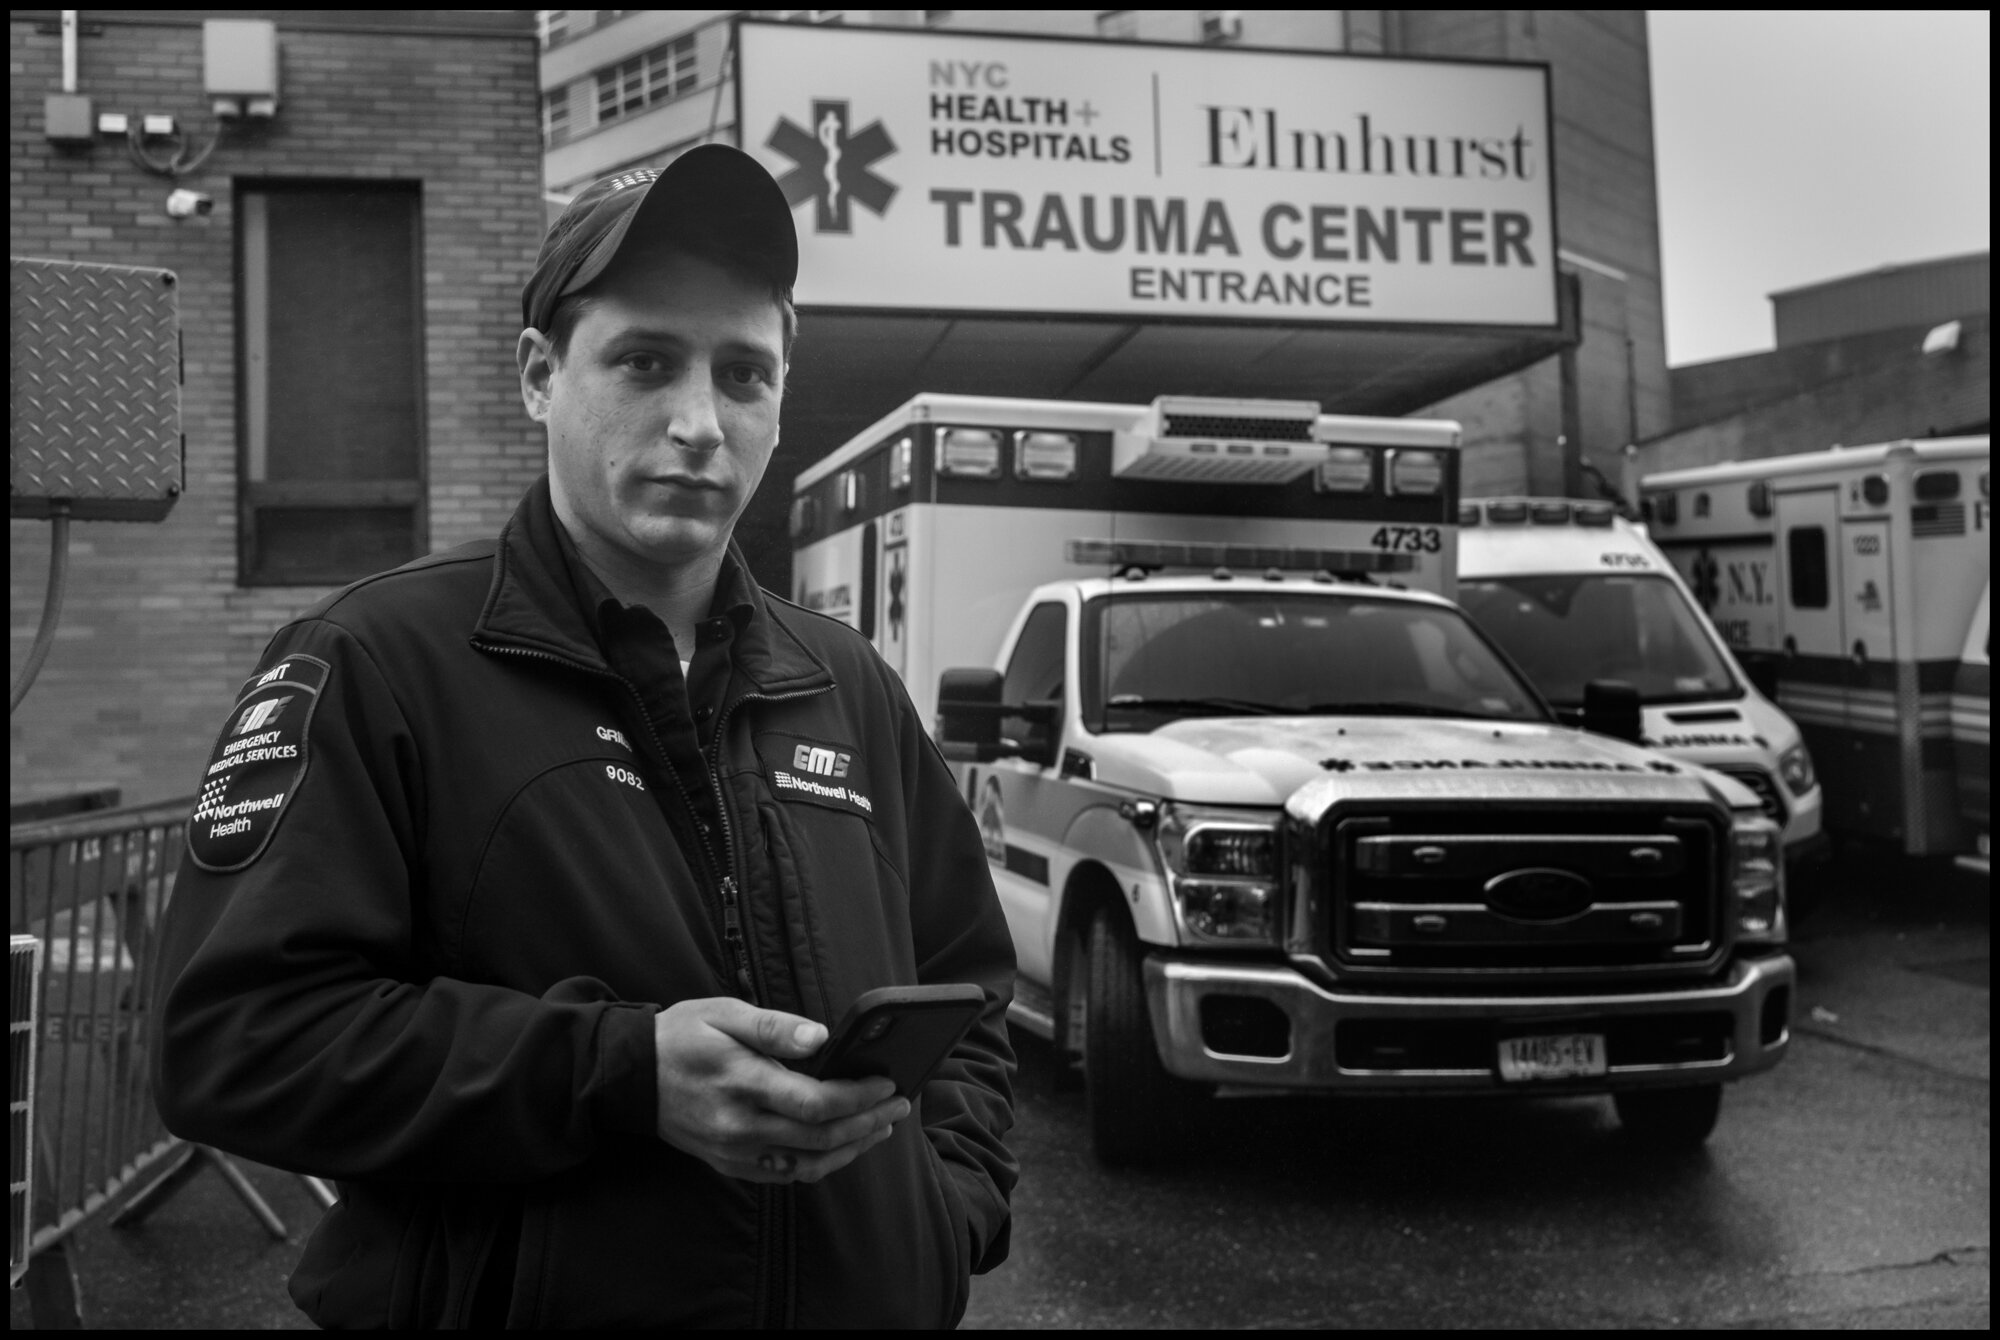  Ambulance Medic Ethan, at the back of the hospital where dozens of ambulances were lined up.   March 29, 2020. © Peter Turnley  ID# 07-003 